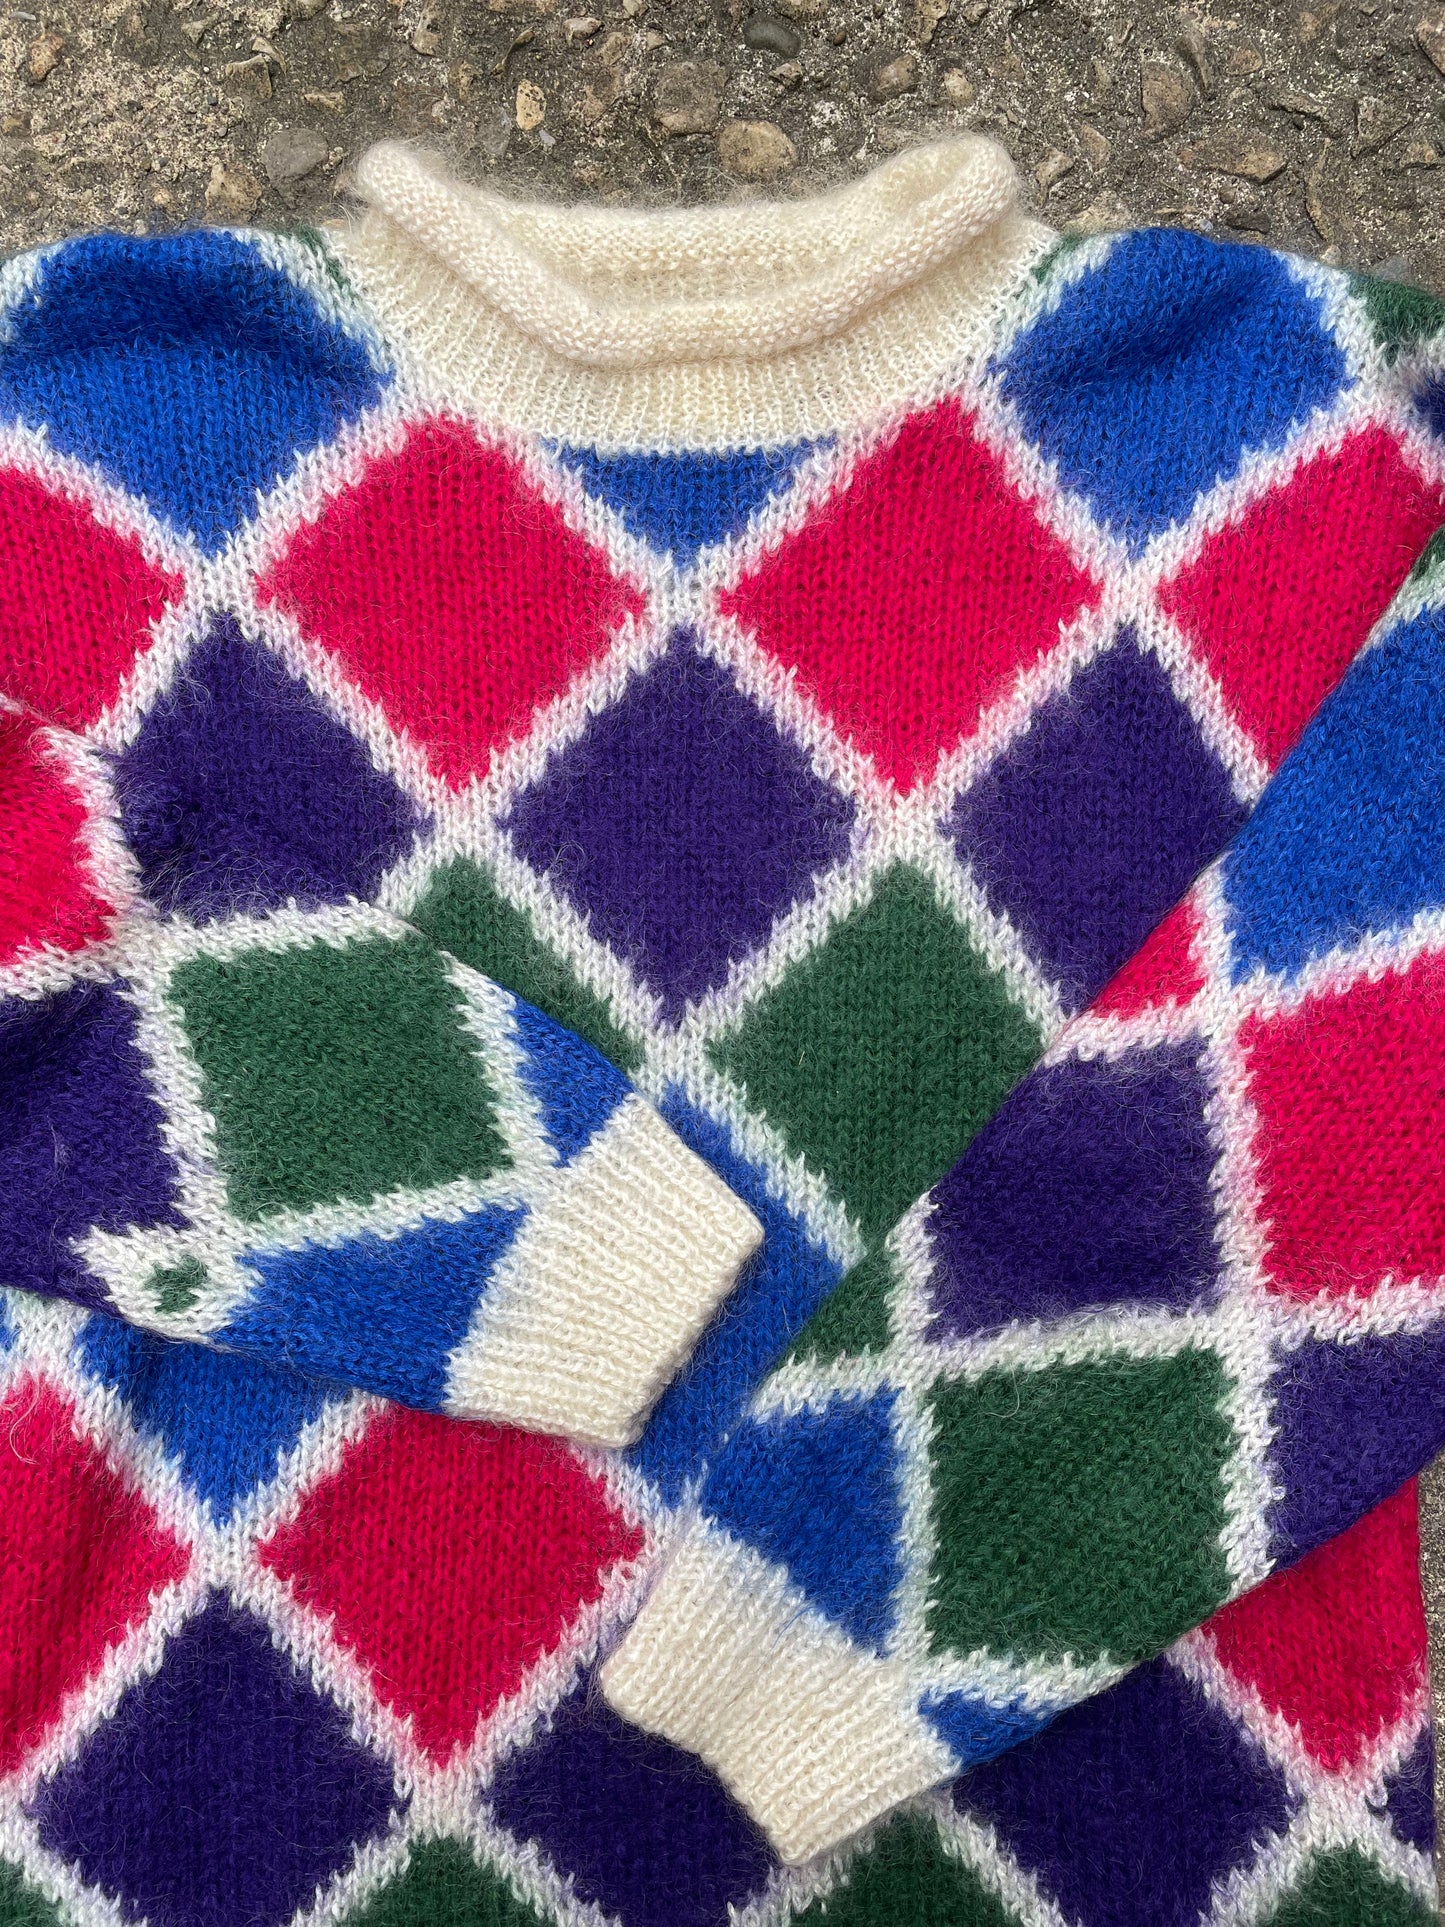 1970's Eaton Patterned Mohair Knit Sweater - M